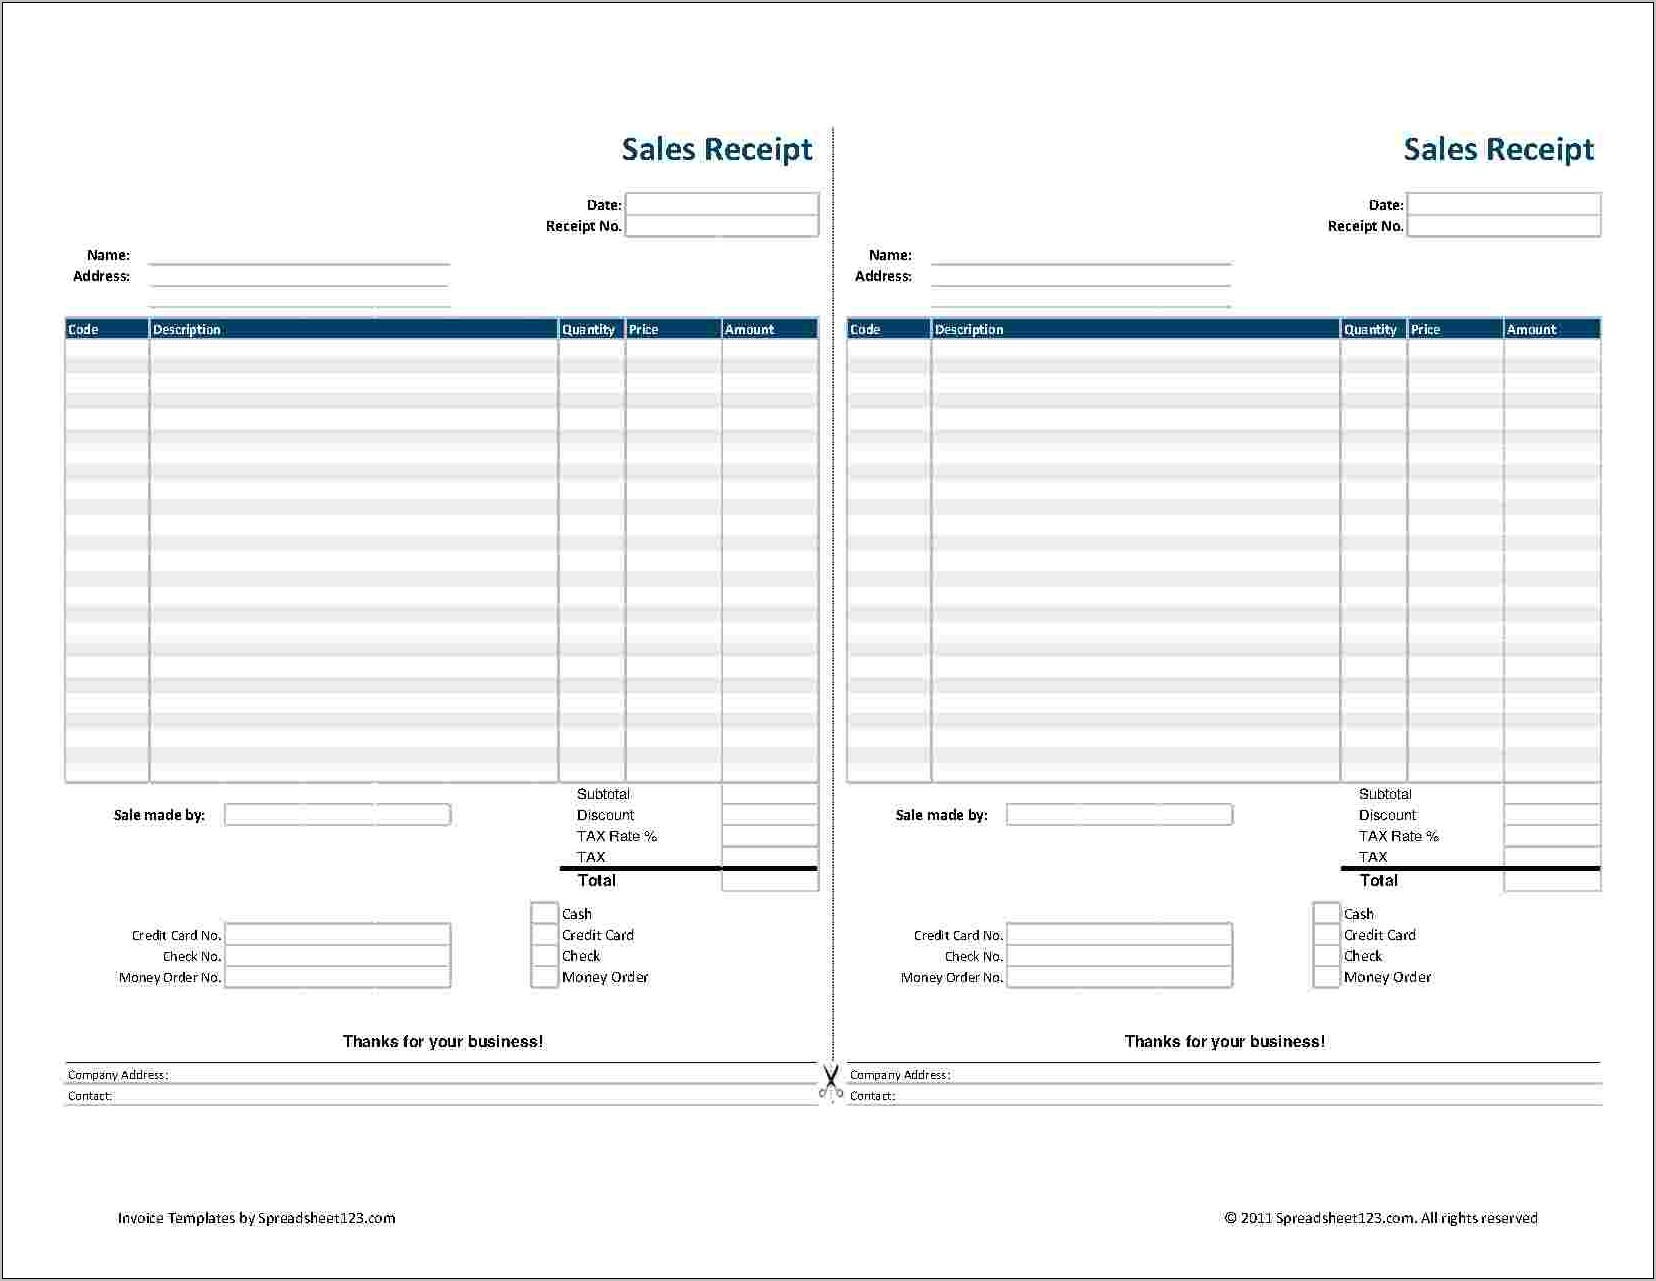 Sales Receipt Template Free Download